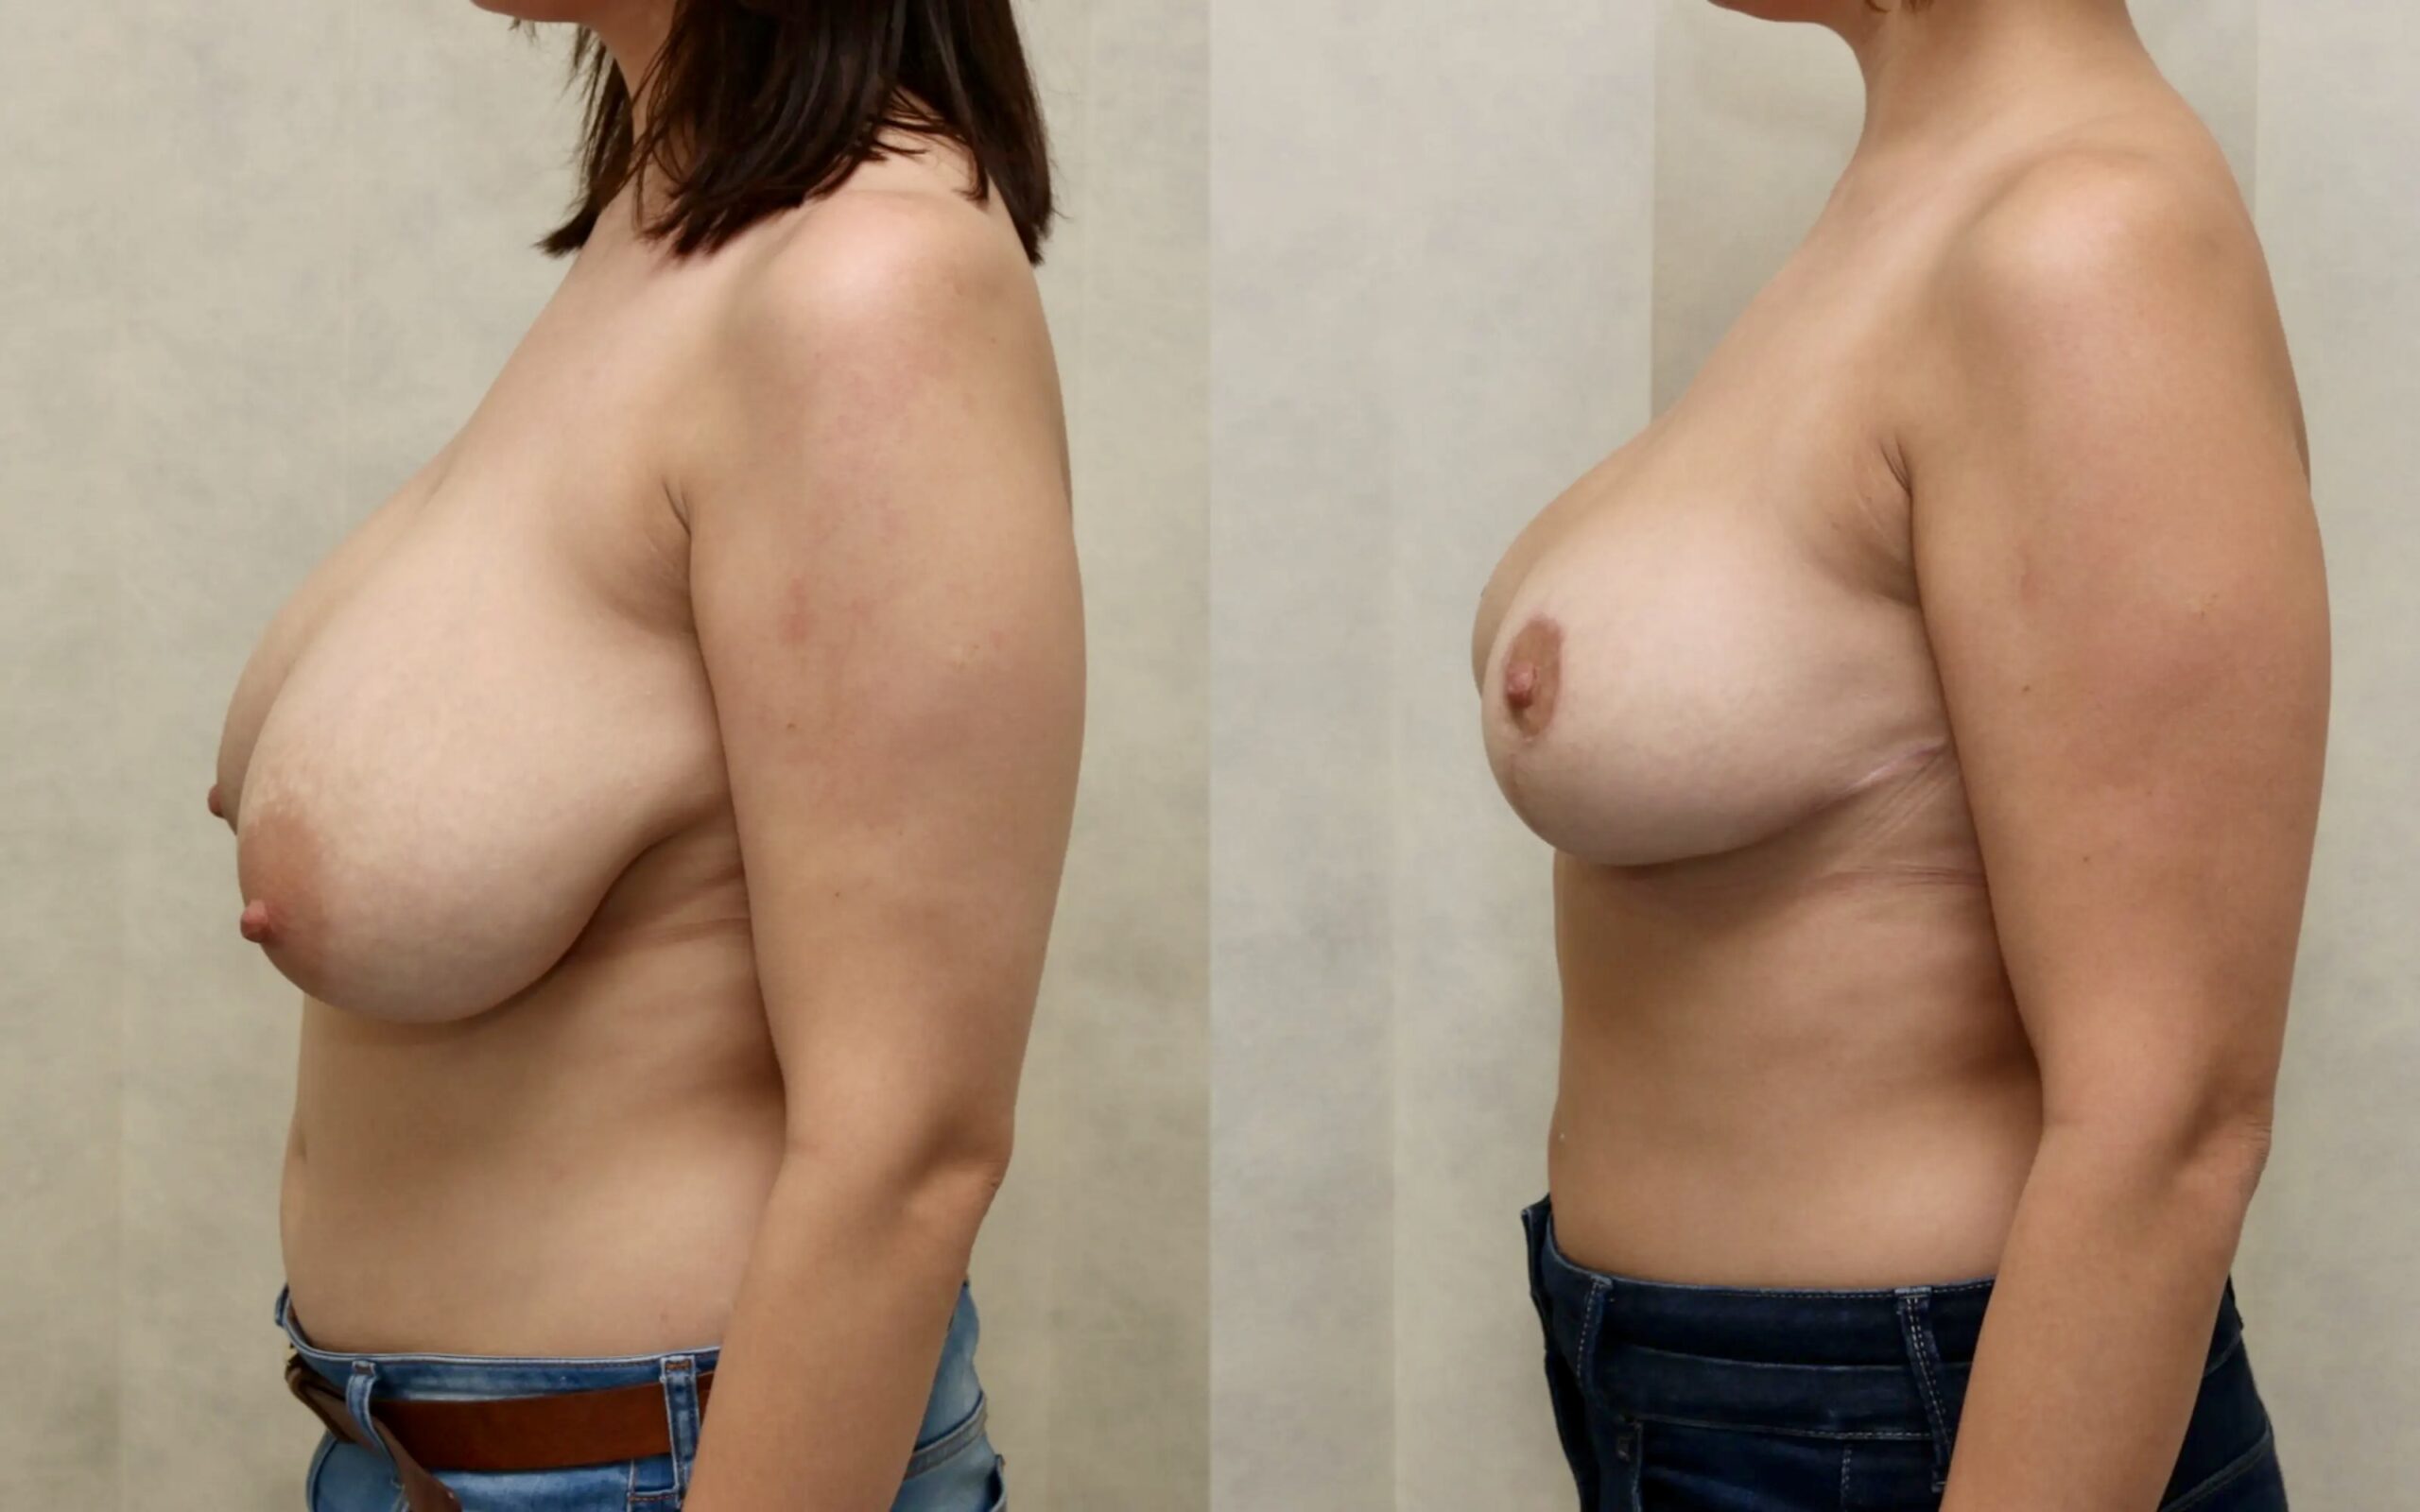 Breast reduction results at four weeks and six months